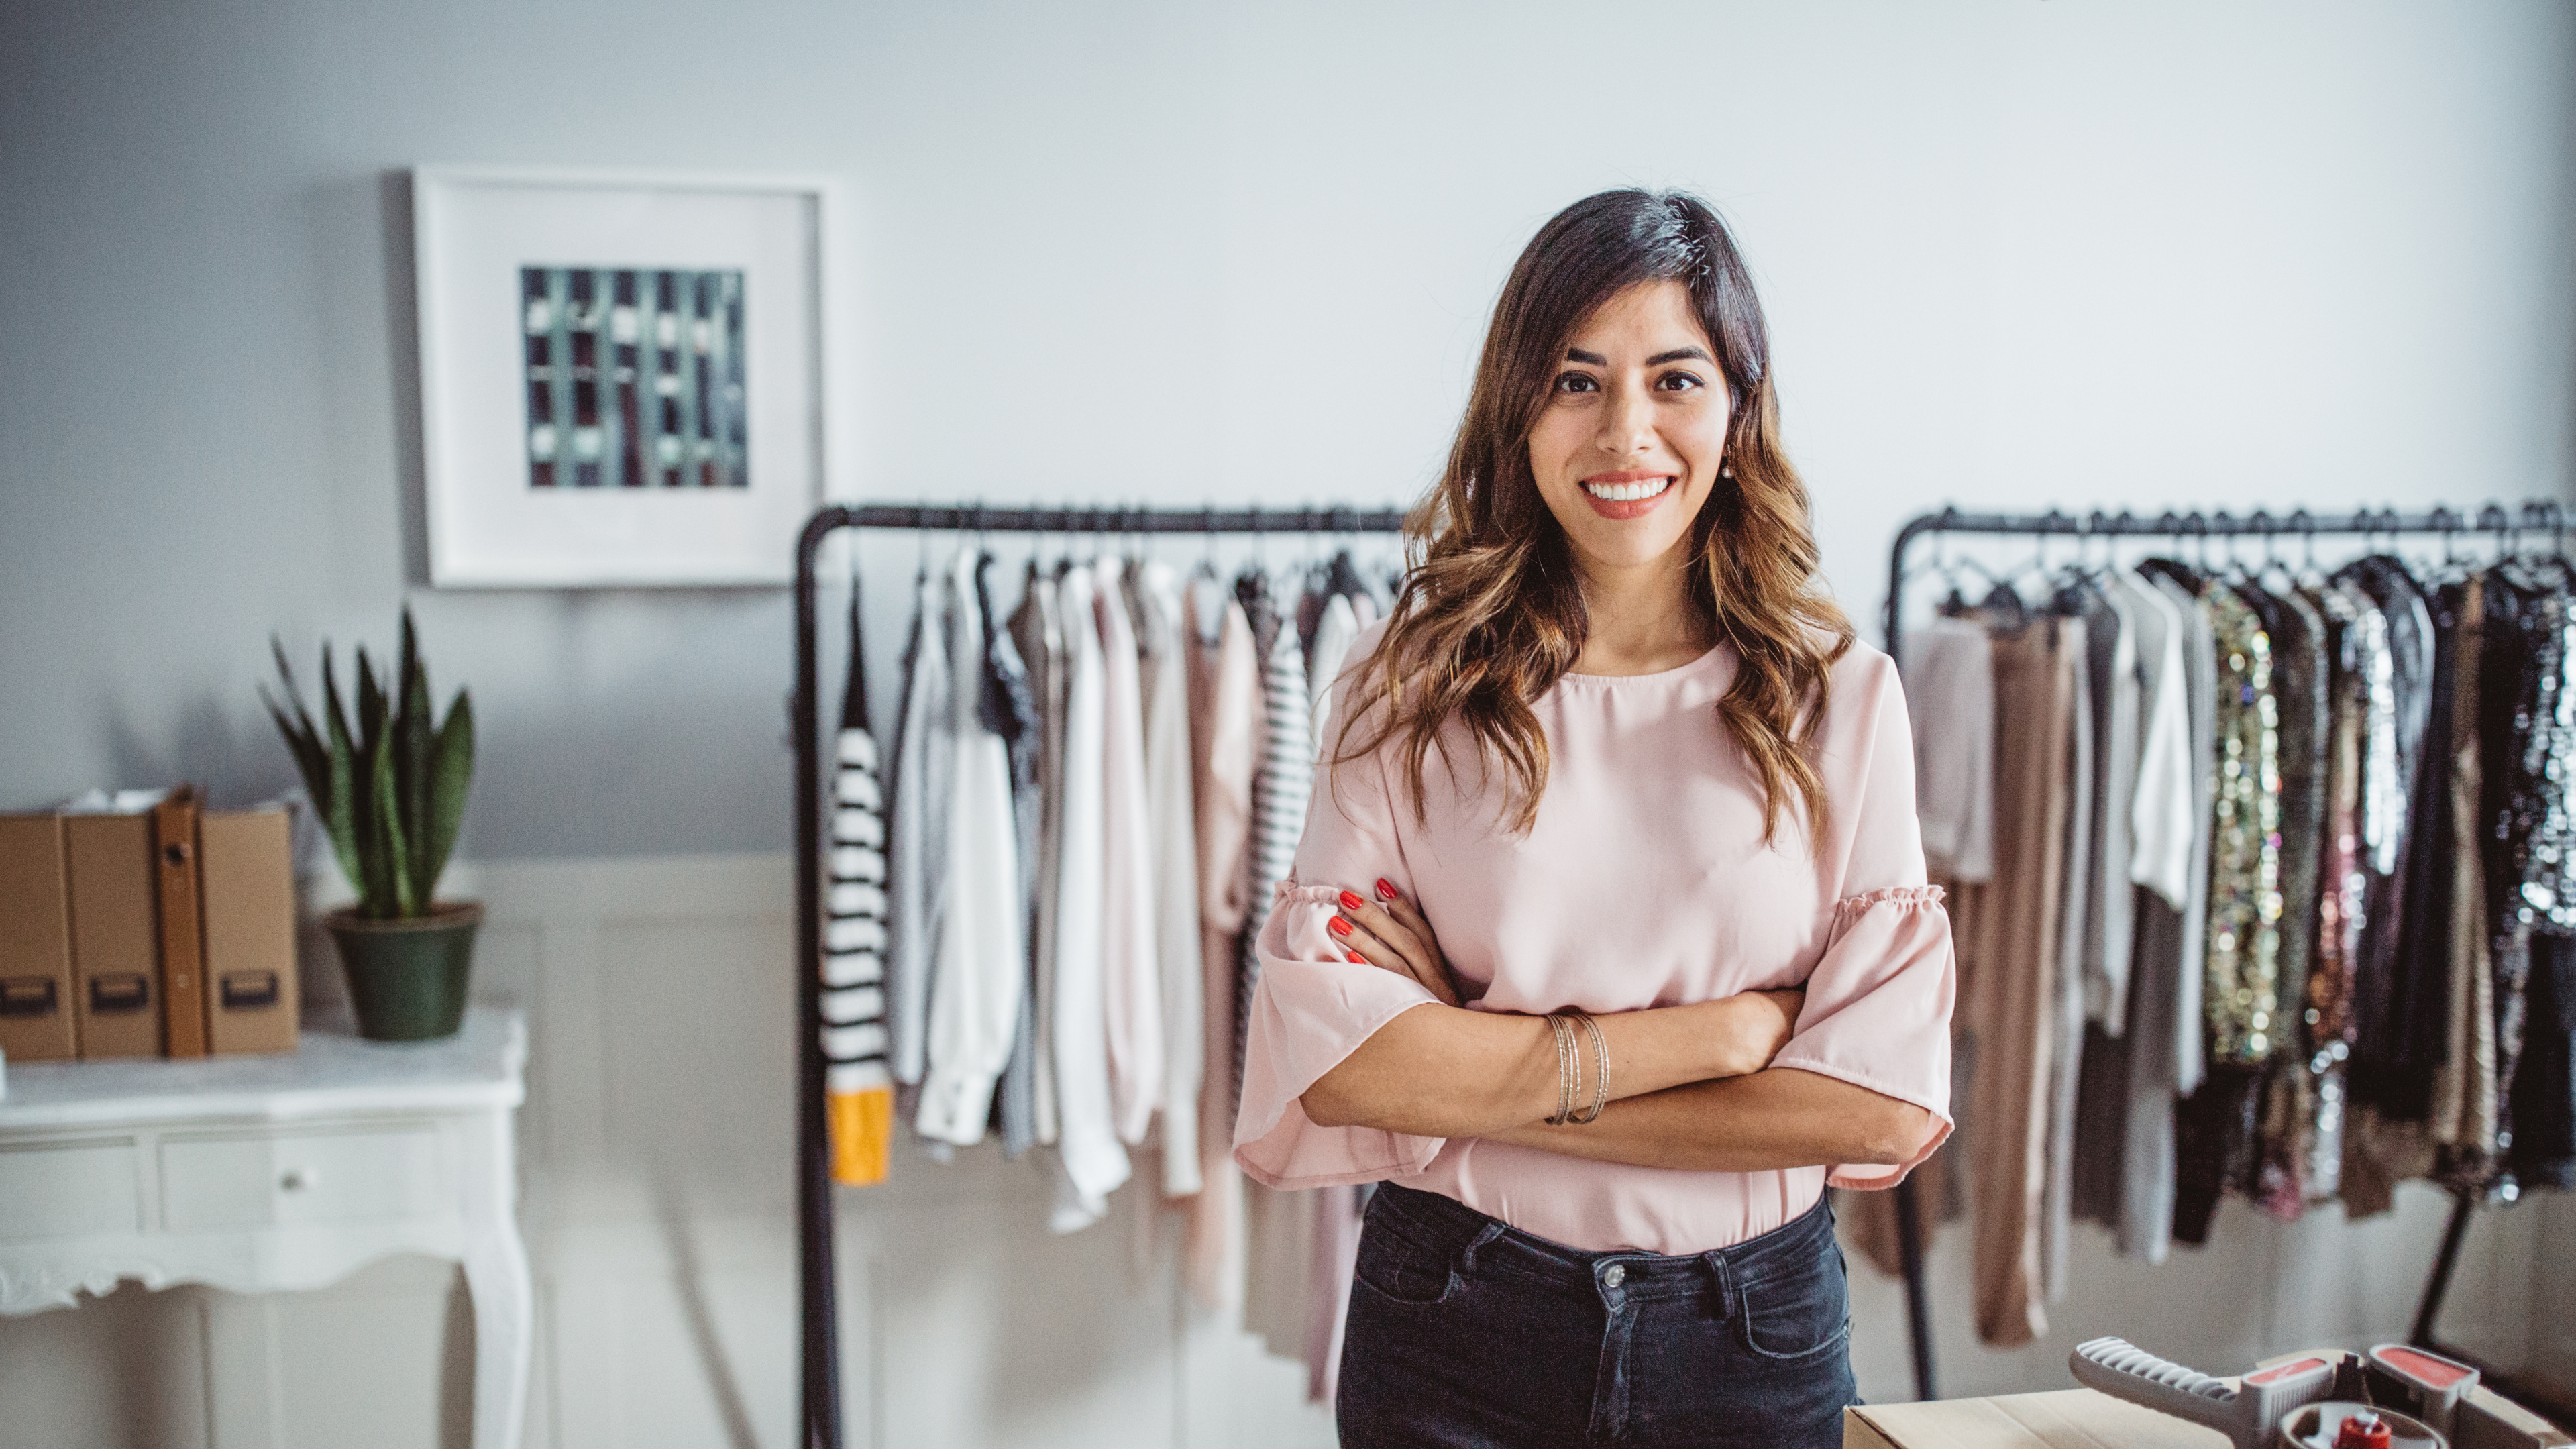 An image of a female business owner in her retail business